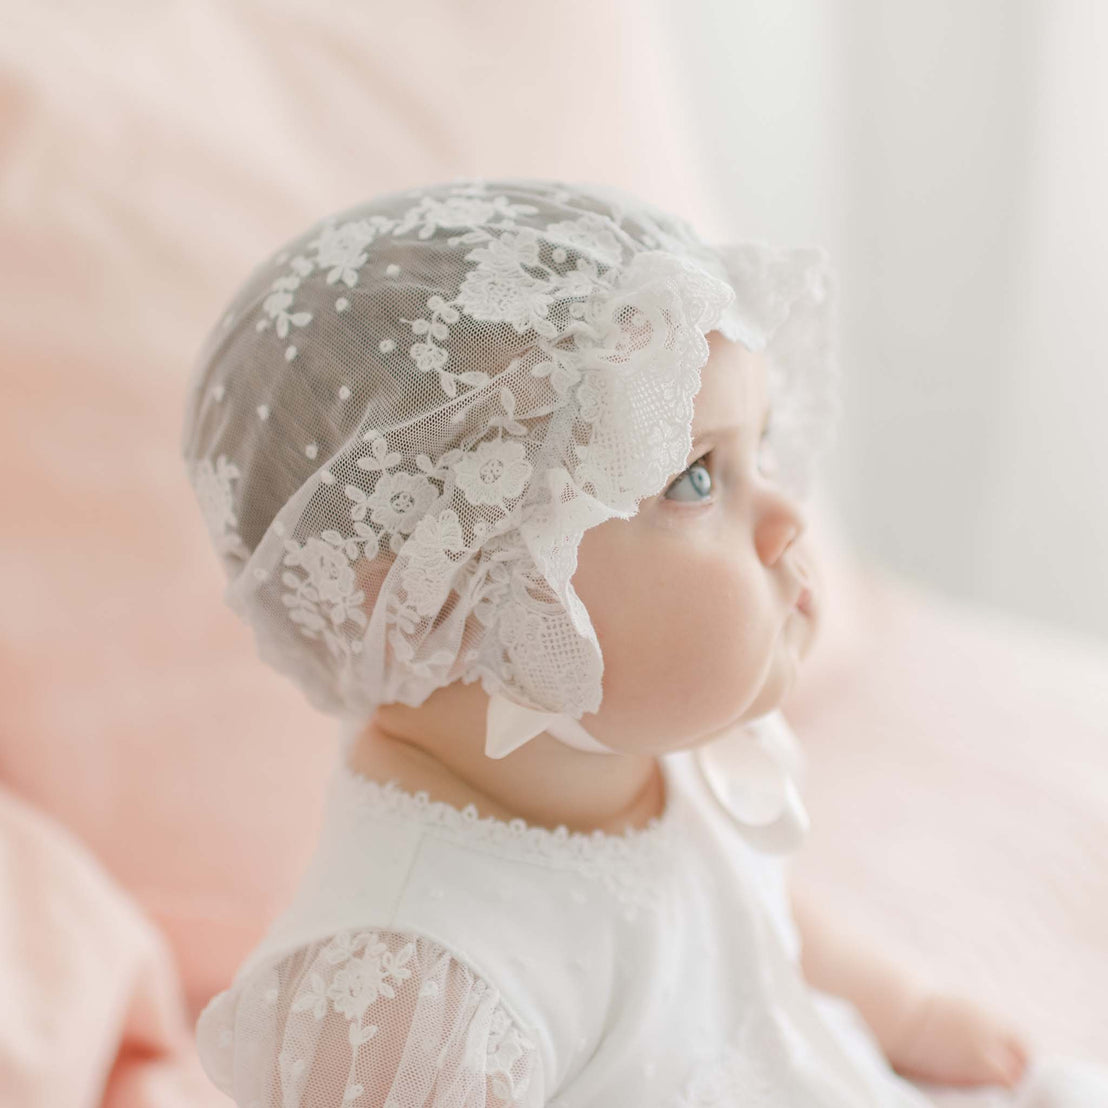 A baby wearing a delicate white Melissa Christening Gown & Bonnet is gazing upwards. The background is softly blurred with pastel pink and white tones, creating a dreamy, serene atmosphere.